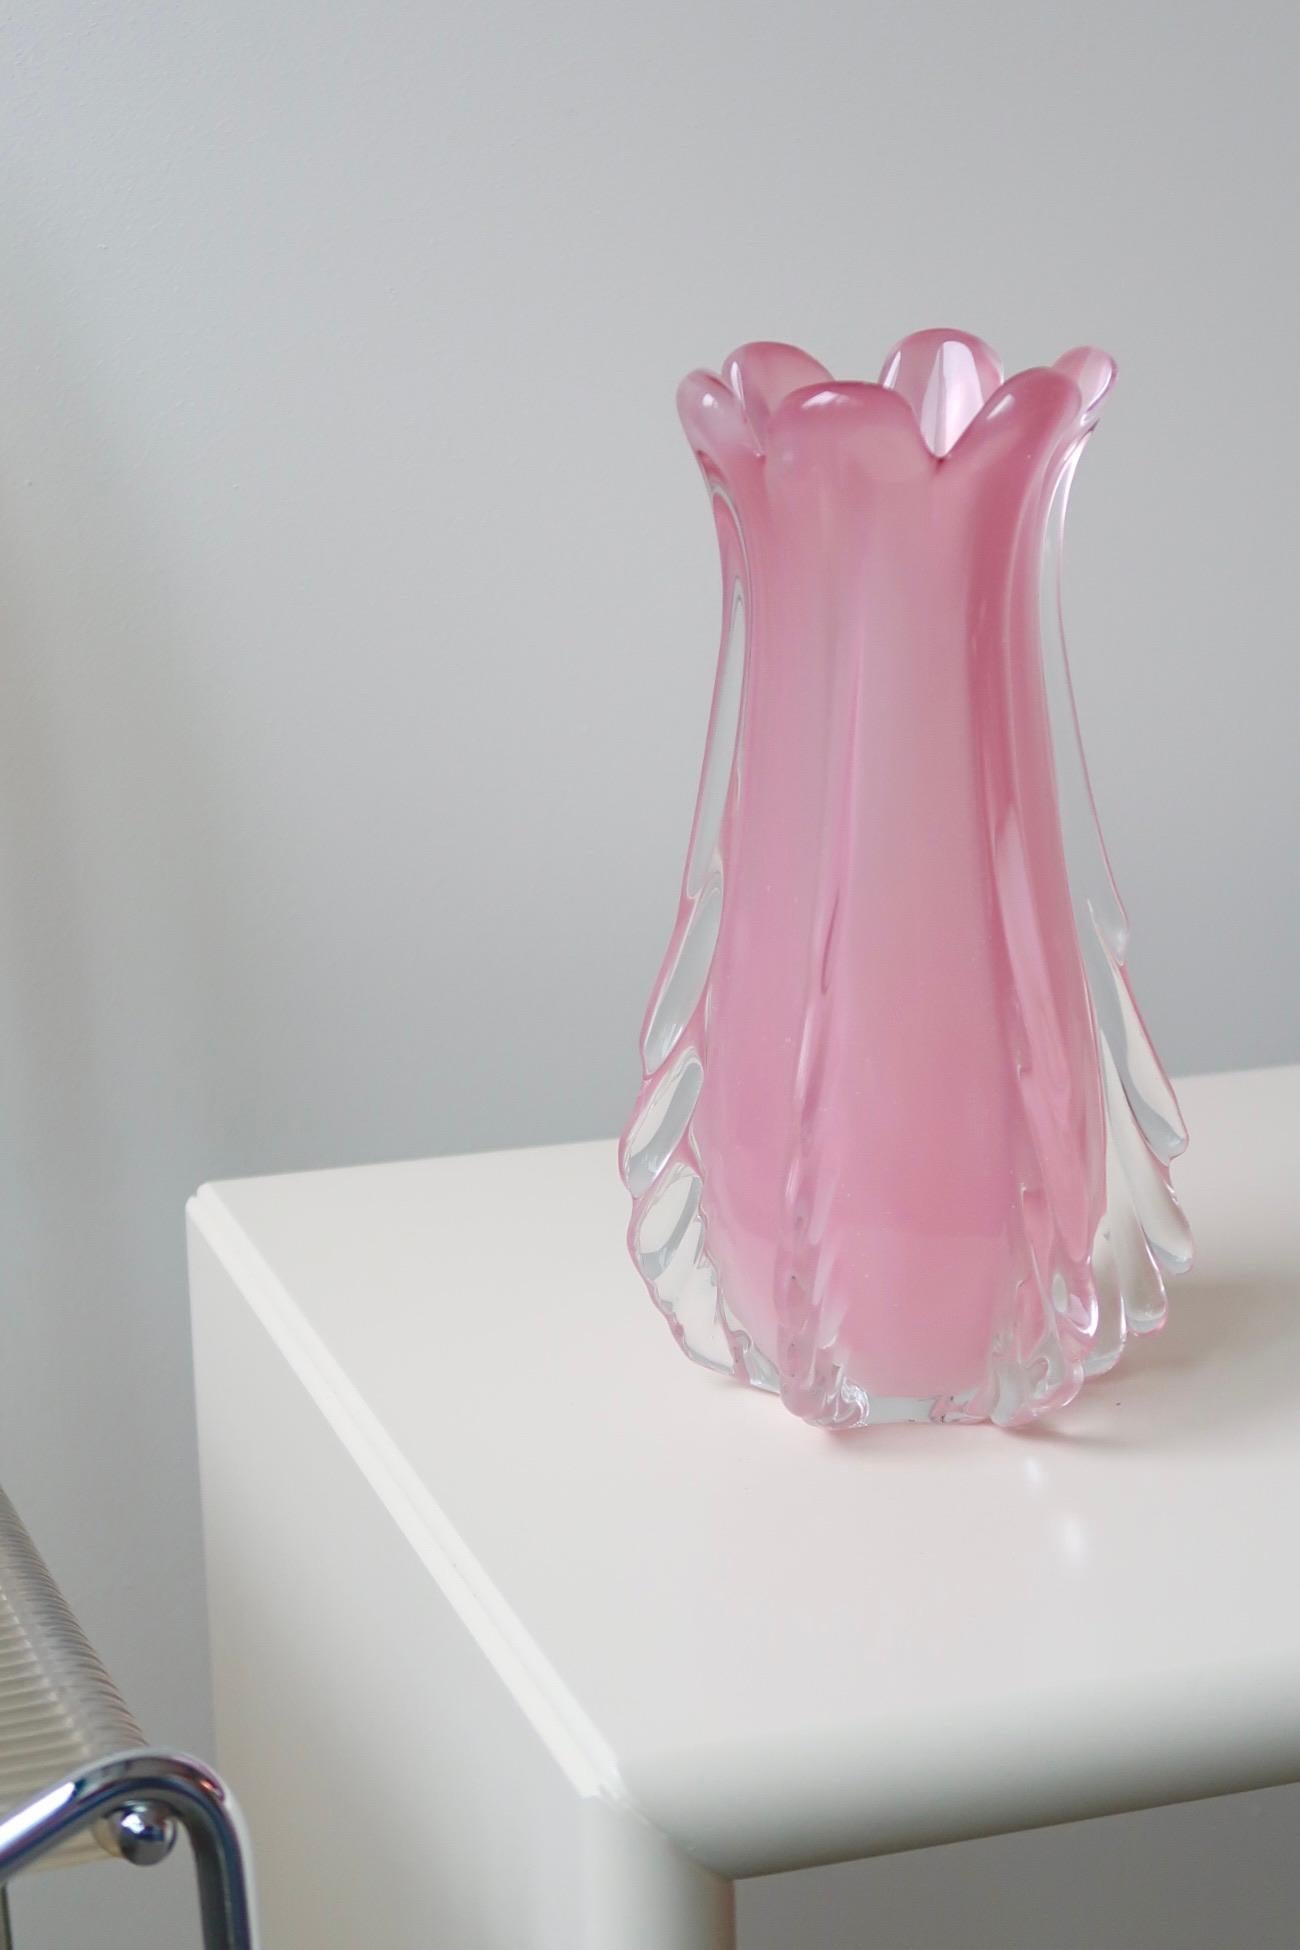 Large Vintage Murano Pink Ribbed Alabastro Opal Vase Mouth Blown Italian 1960s In Good Condition For Sale In Copenhagen, DK